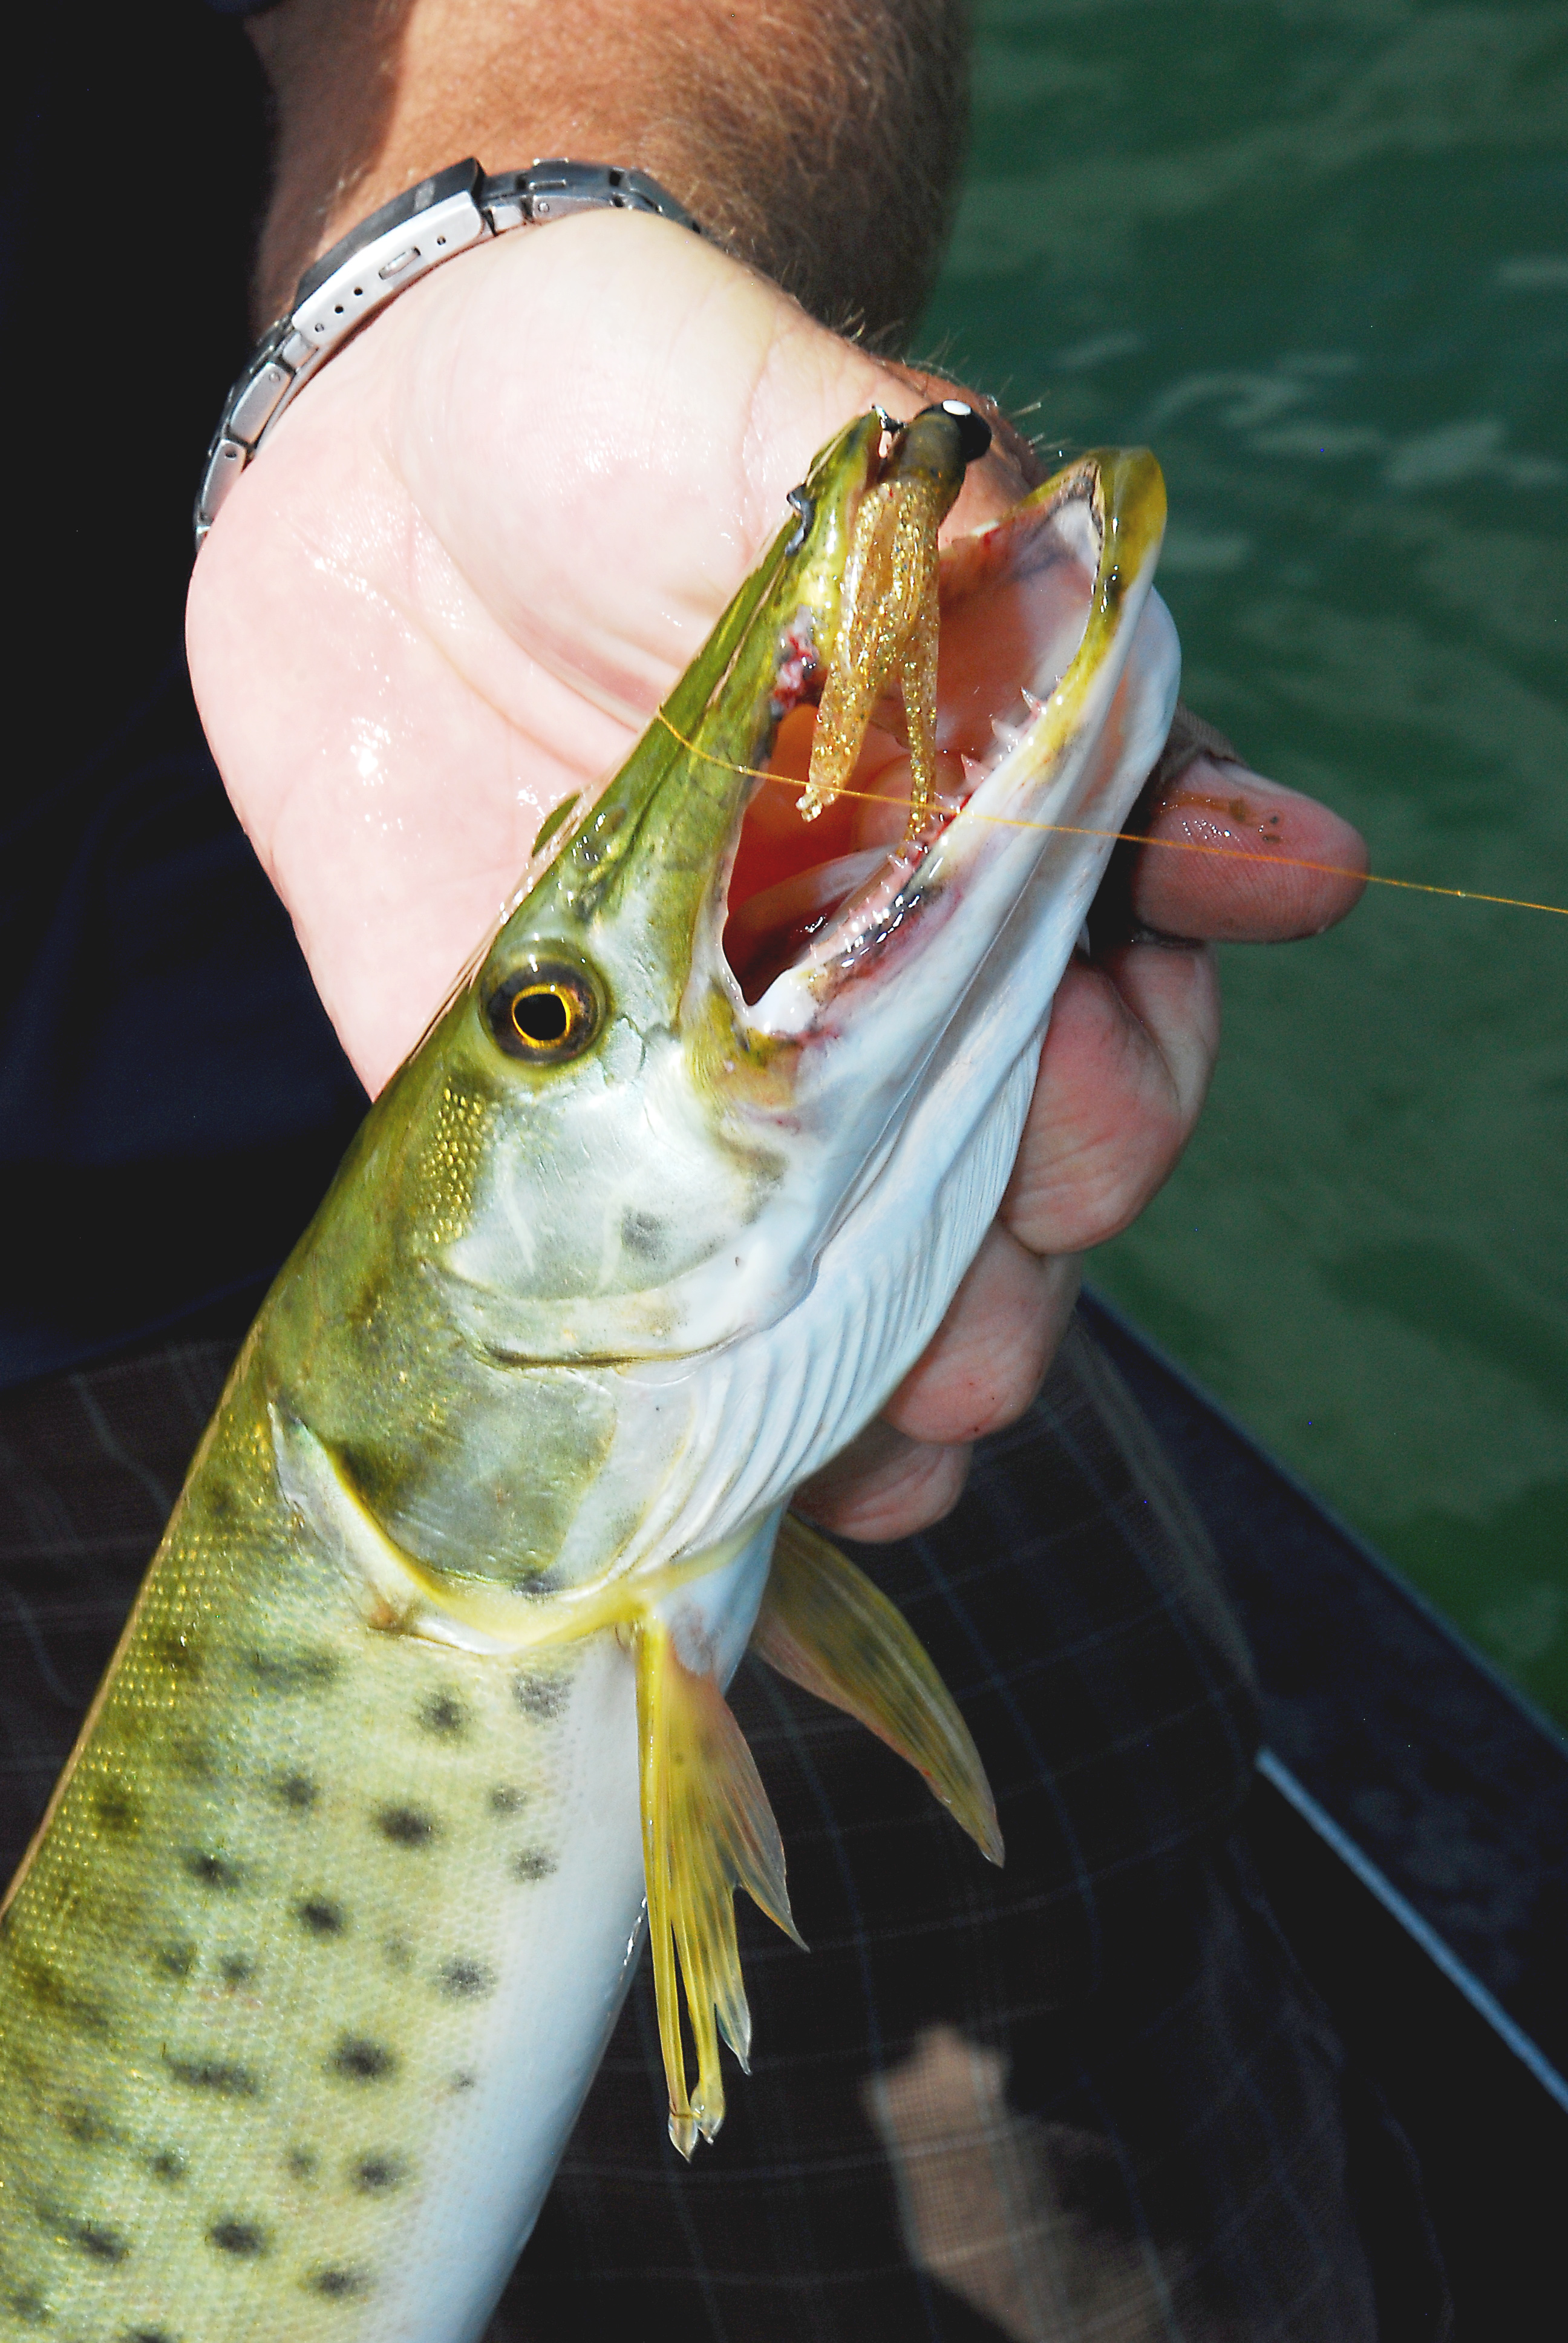 Muskie Hunter: How to Fly Fish for Muskies - Fly Fisherman